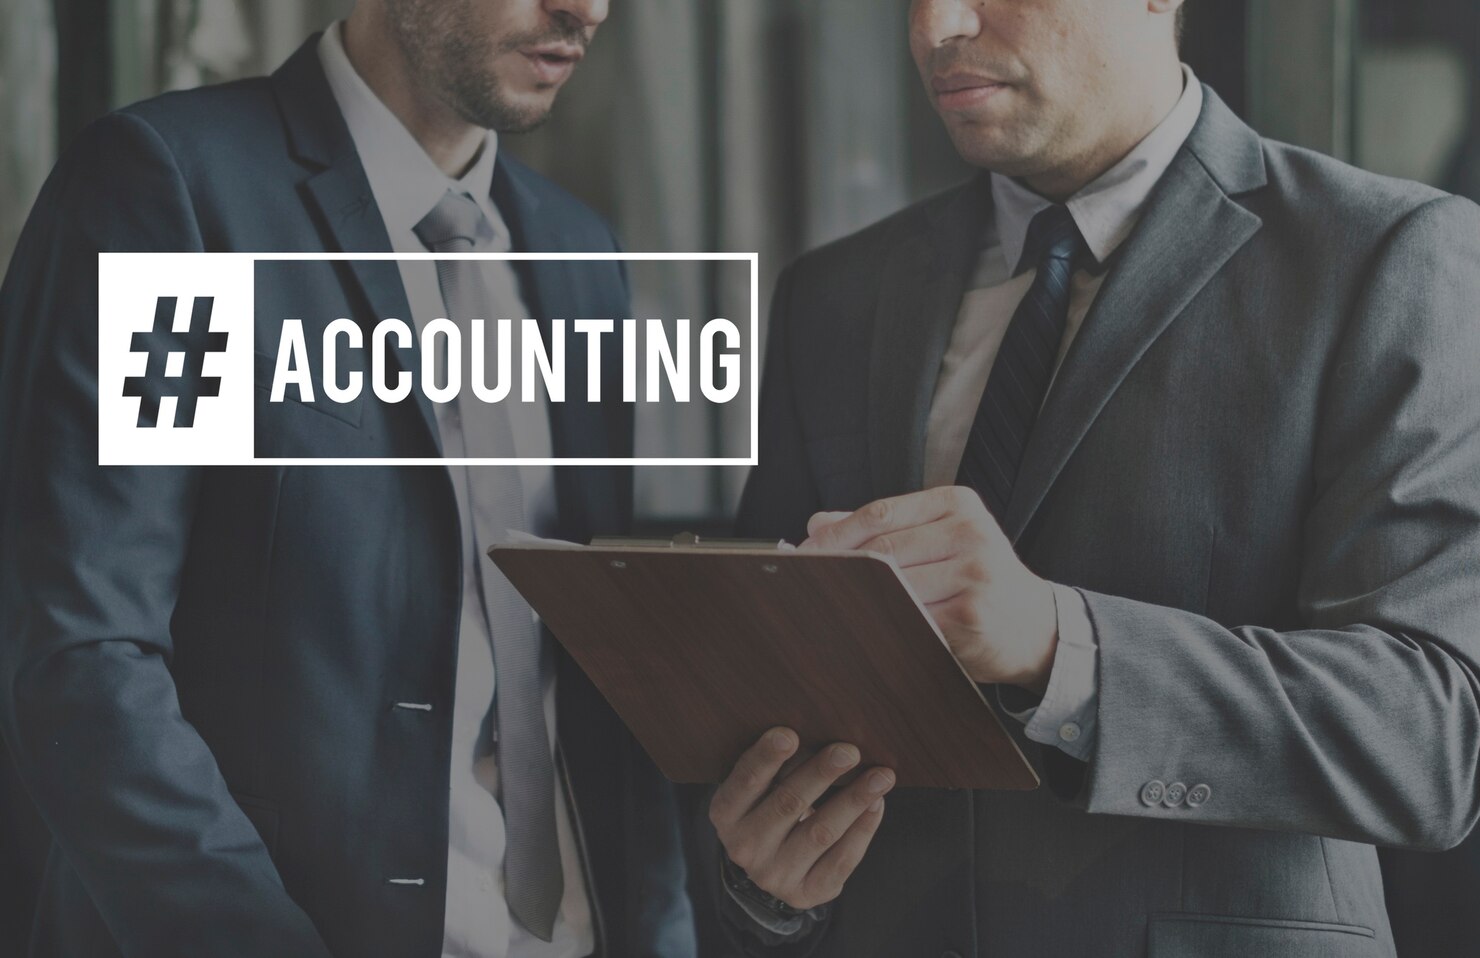 Globus Finanza specializes in outsourced accounting, providing a team with industry insights. Contact https://globusfinanza.com/ Address: 600 N Broad Street, Suite 5 #665, Middle Town, Delaware 19709, United States.